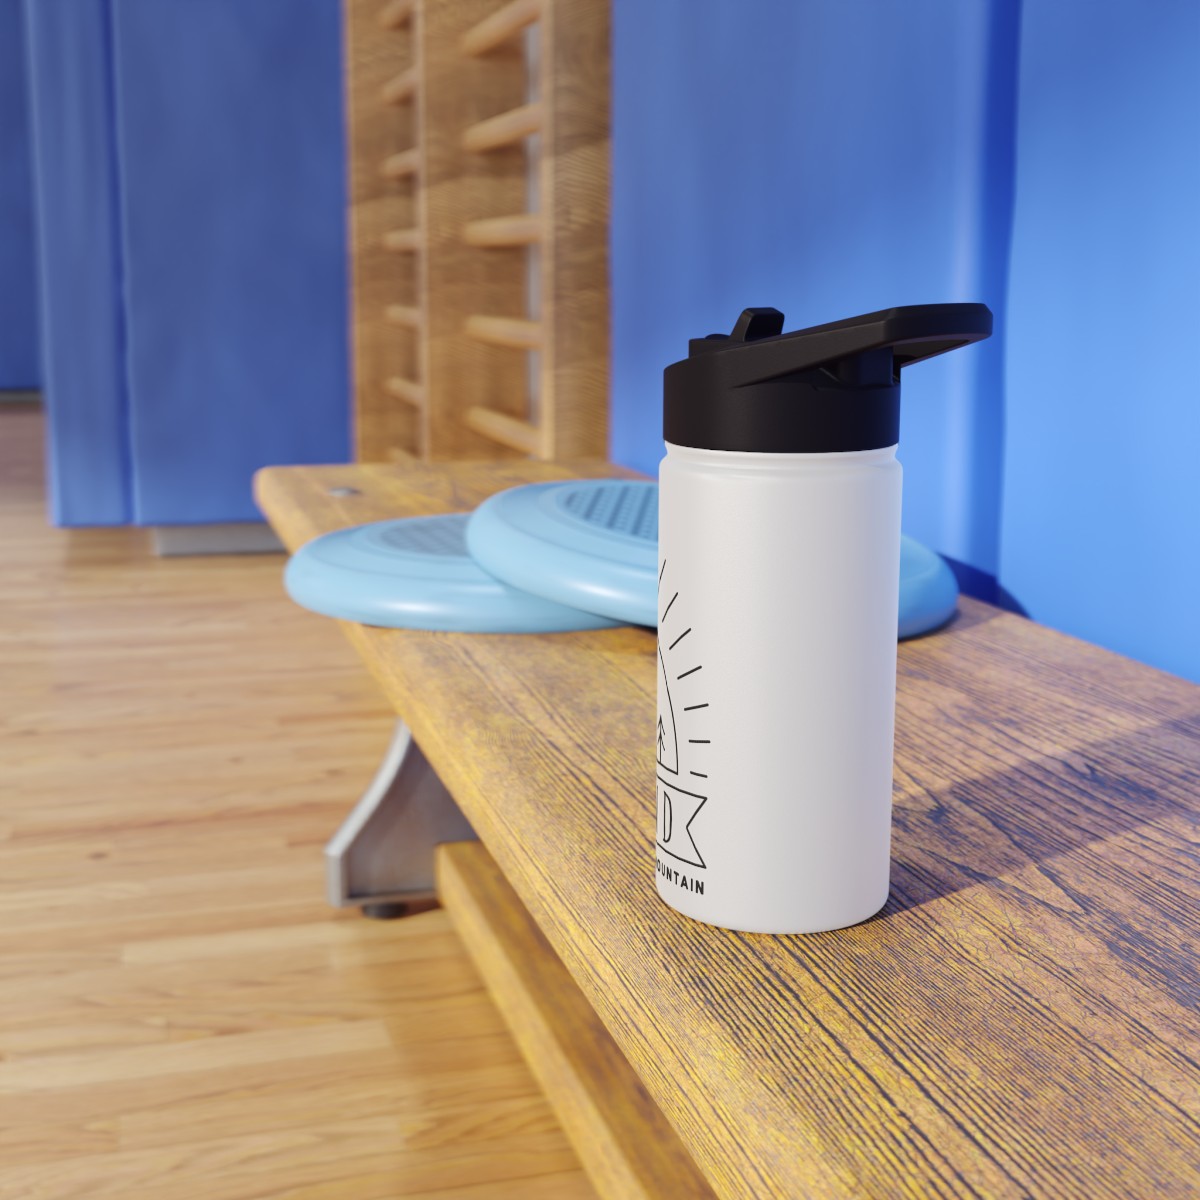 Stainless Steel Water Bottle, Standard Lid - Empowered product thumbnail image